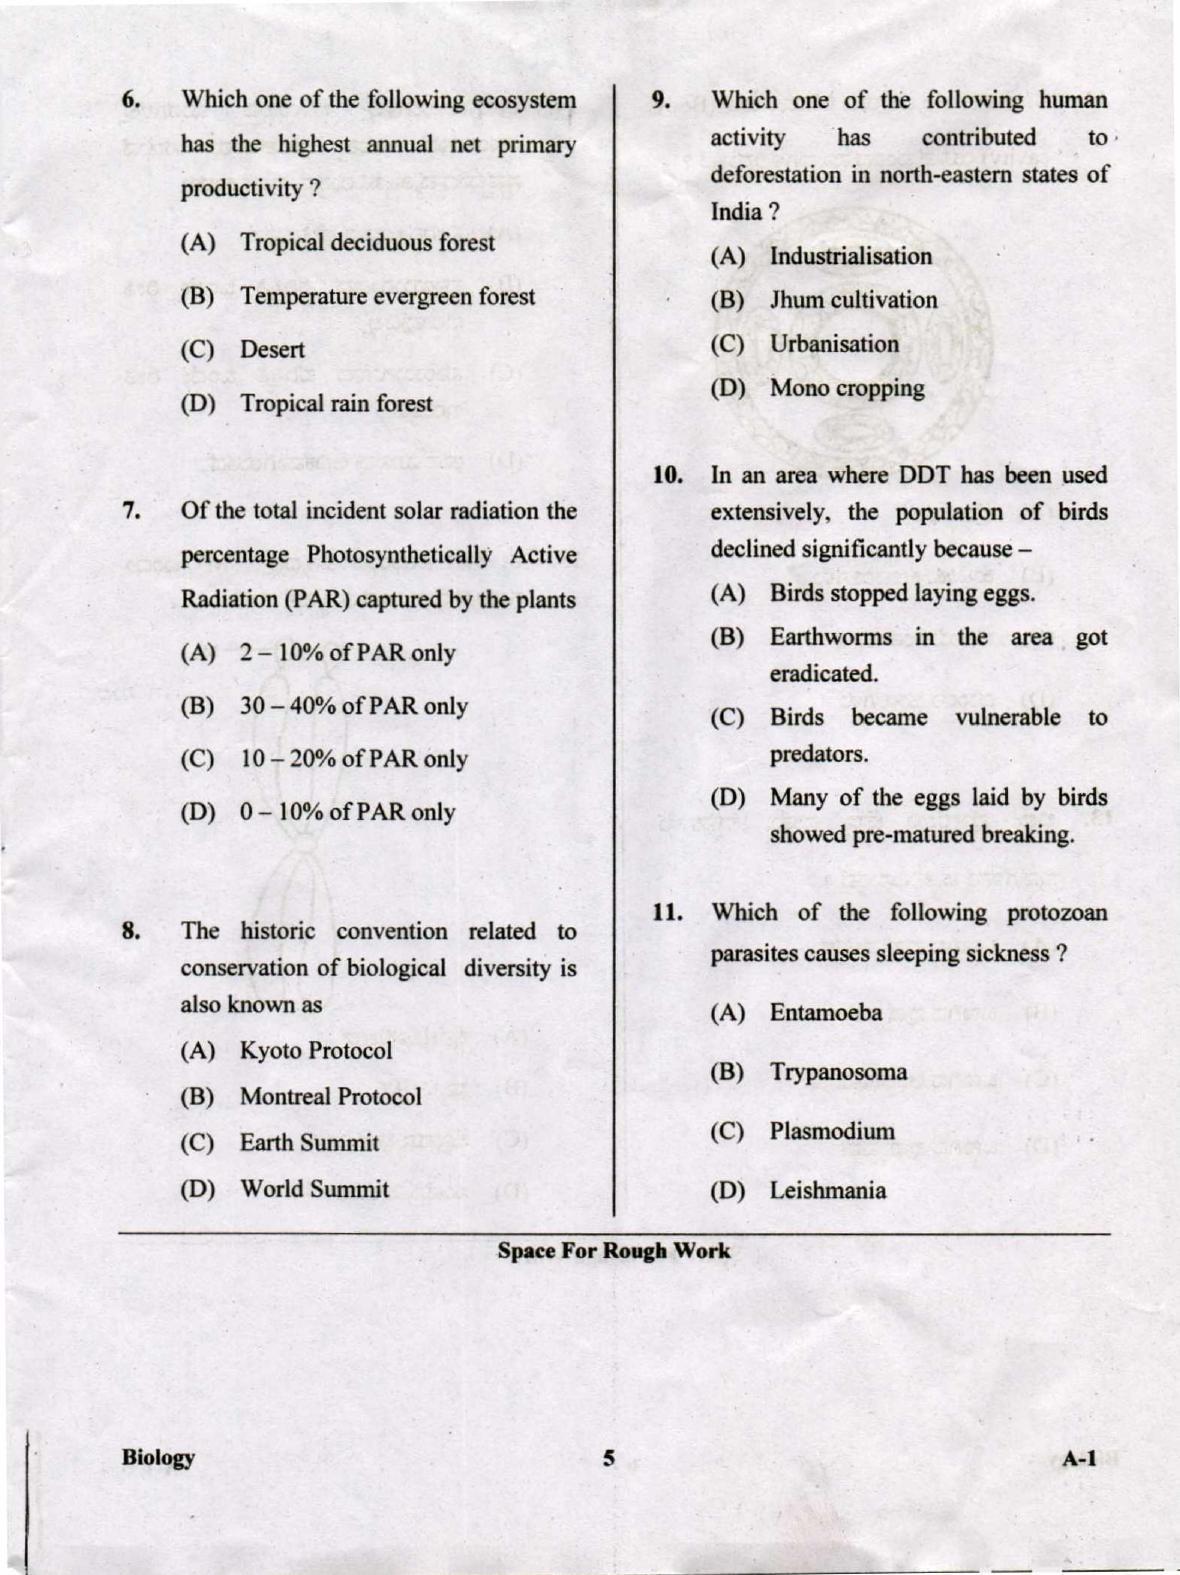 KCET Biology 2019 Question Papers - Page 5